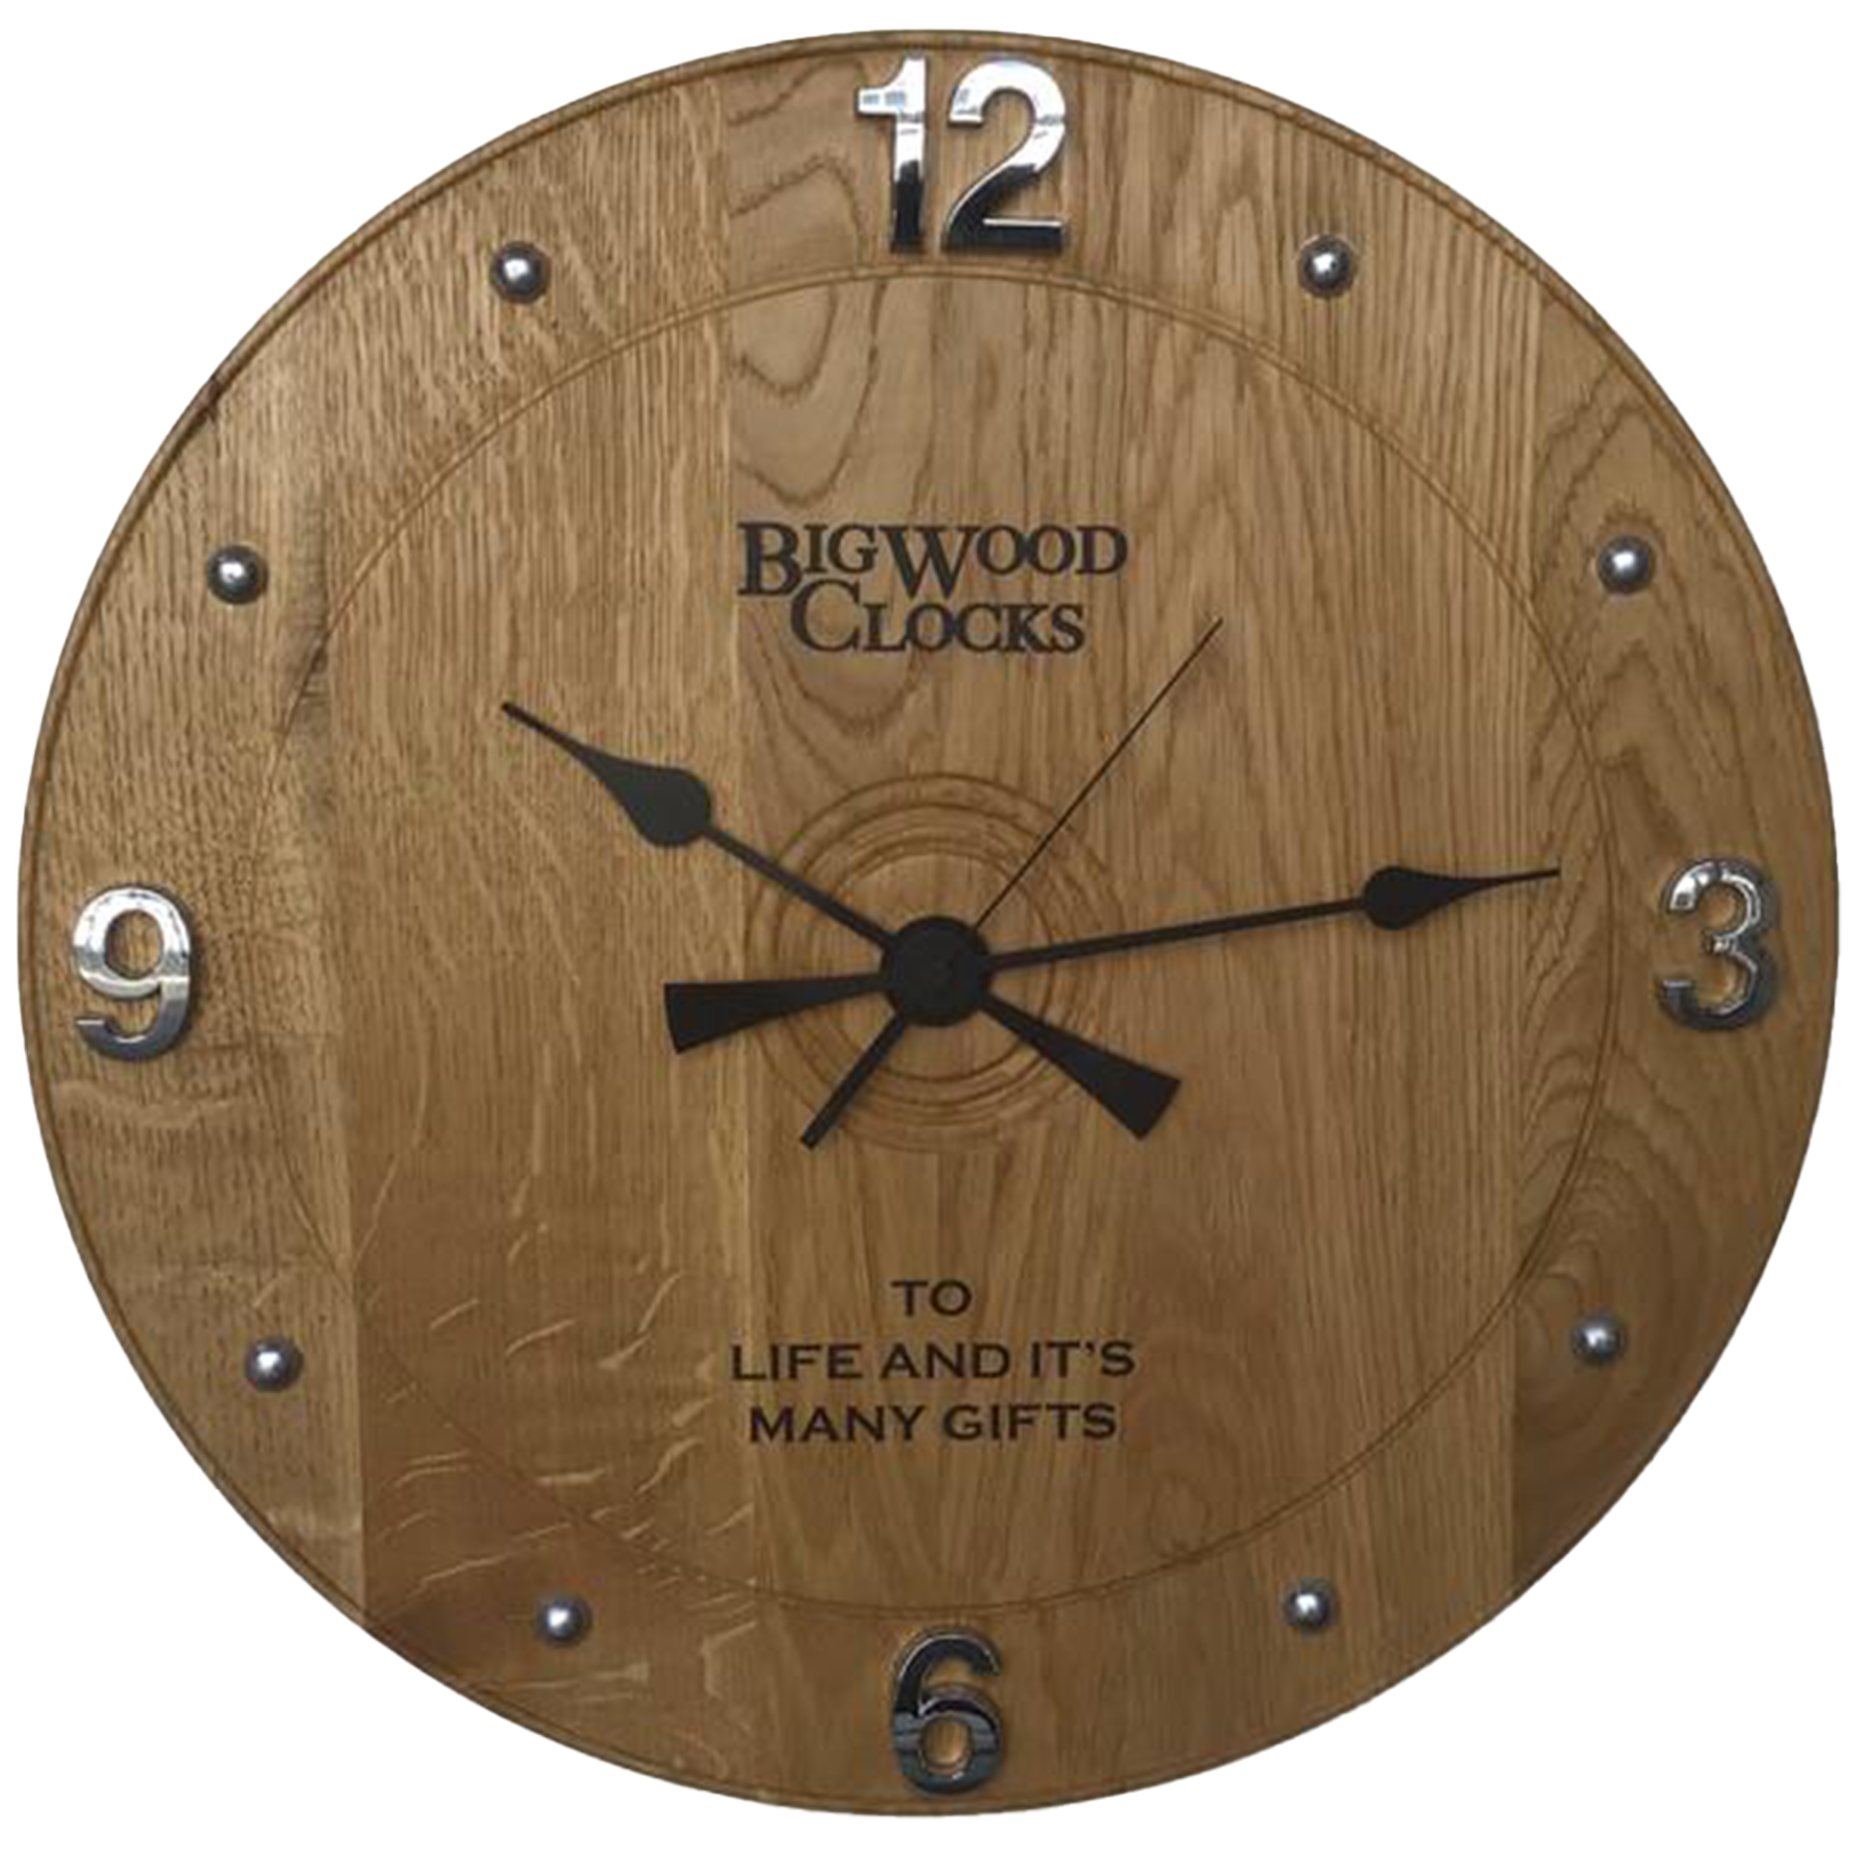 "To Life And It's Many Gifts" - Solid Oak Clocks